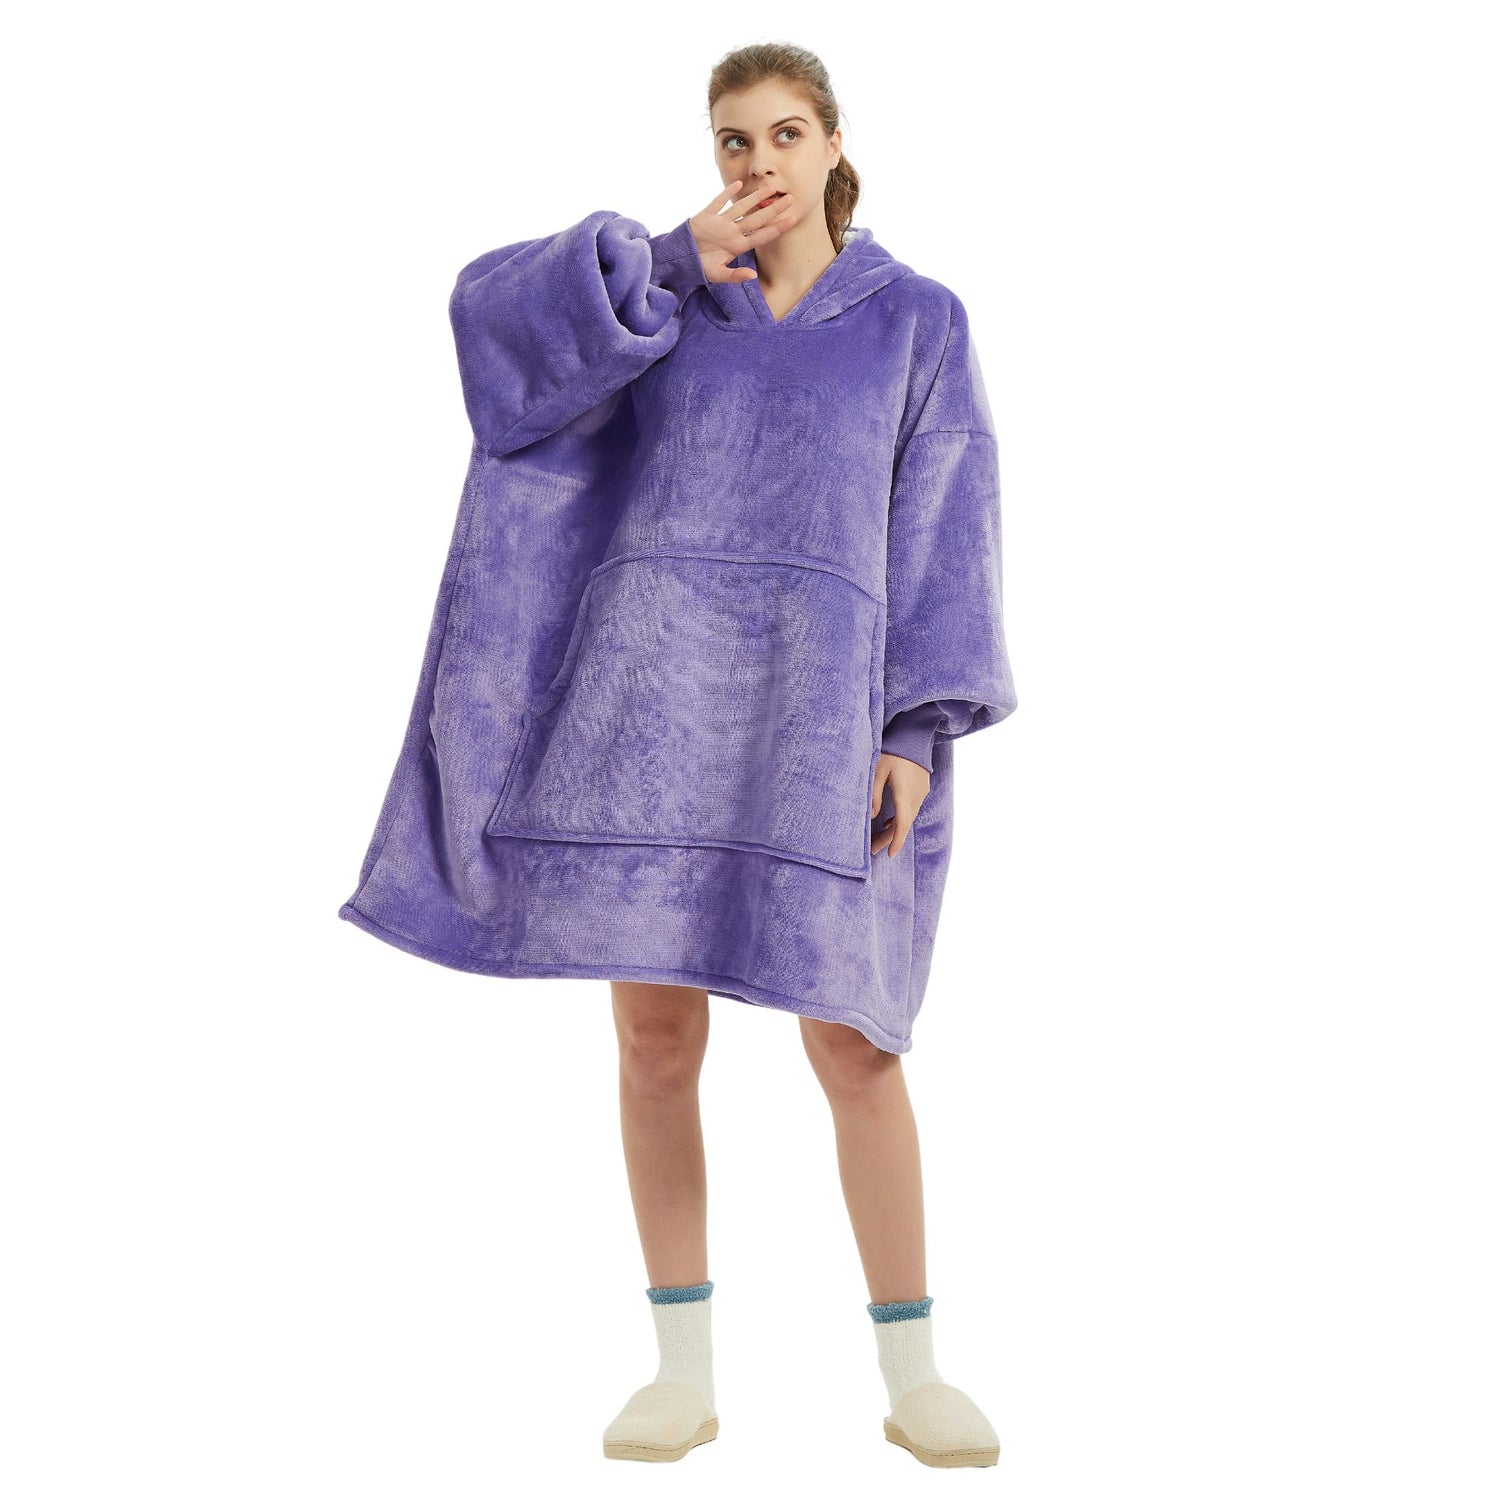 The Oversized Hoodie® woman giant large size long XL XXL thick purple 